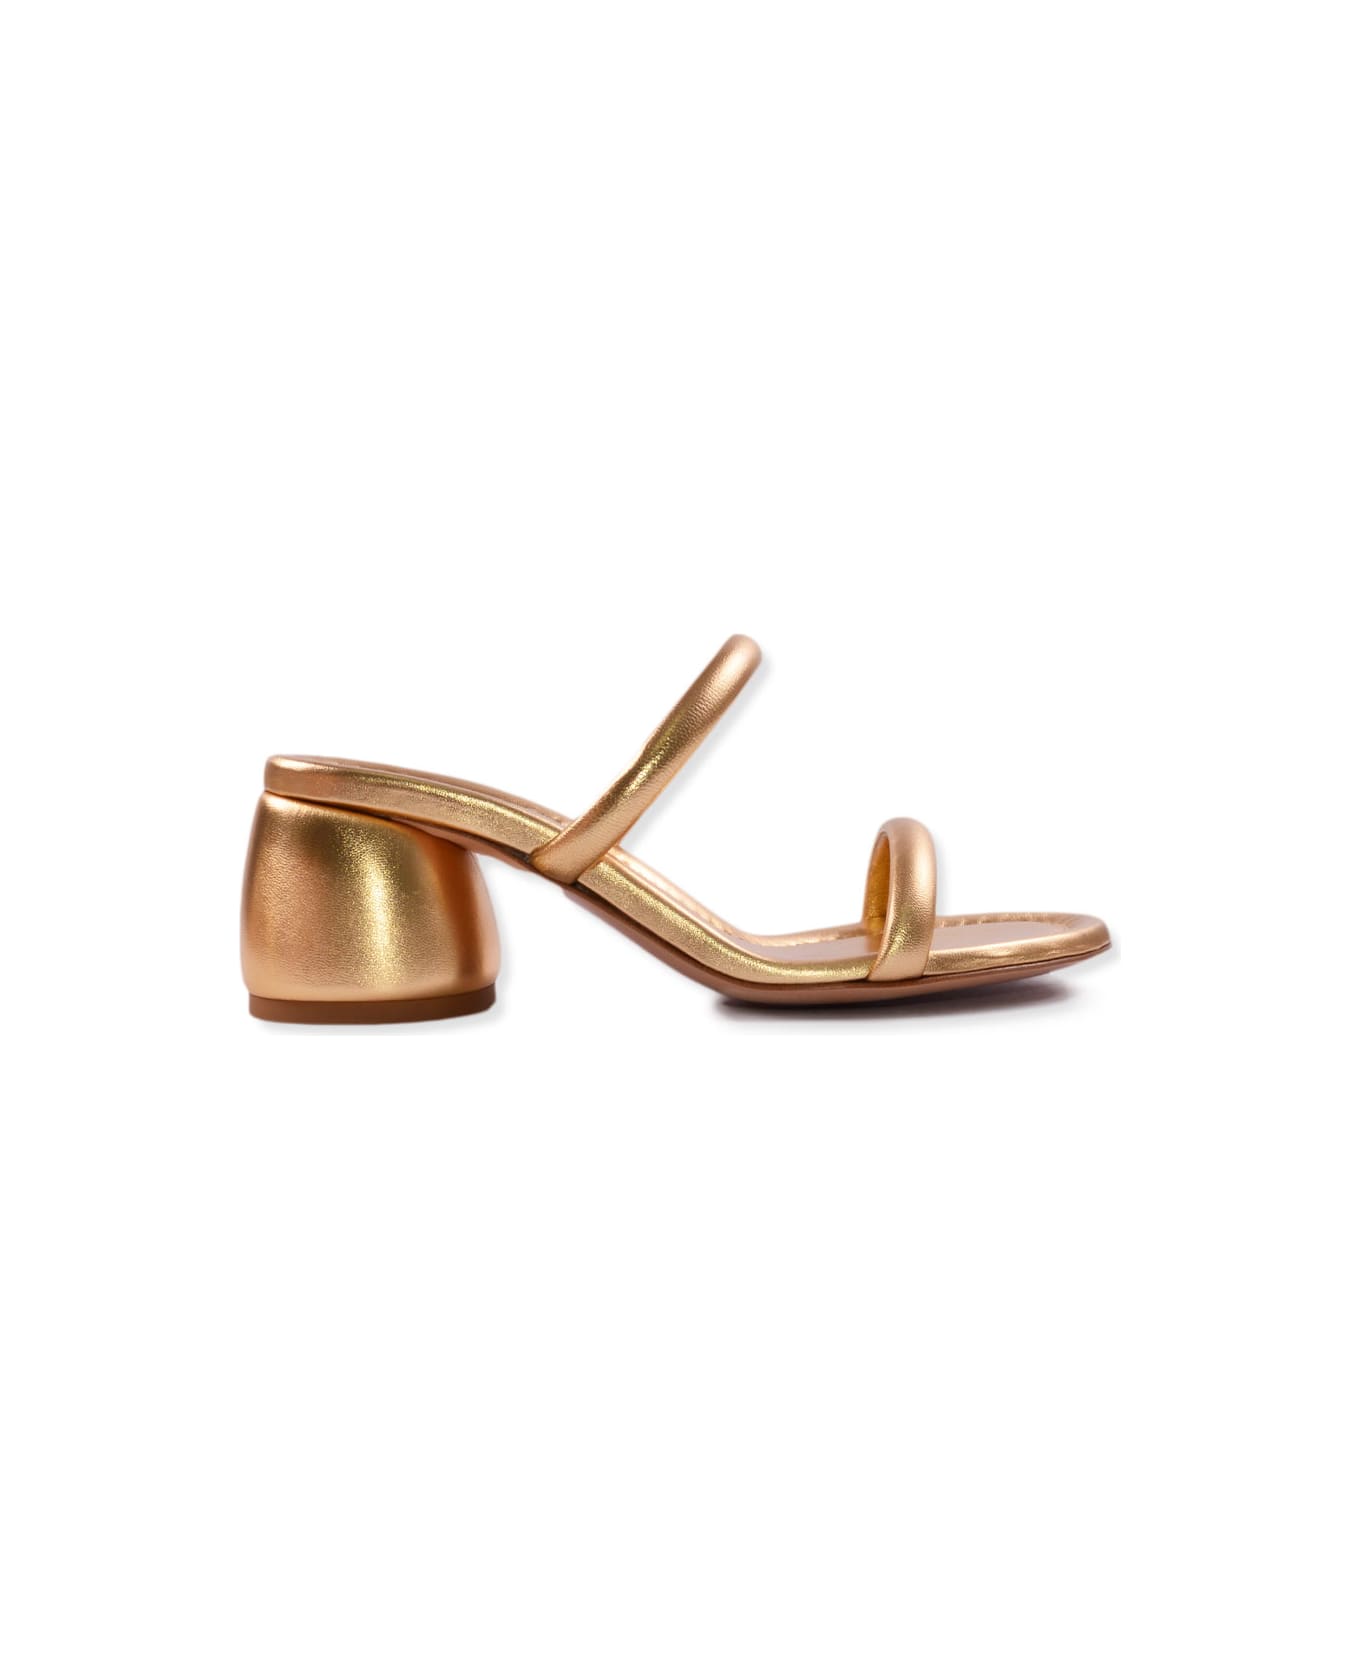 Gianvito Rossi Sandal With Heel - Gold